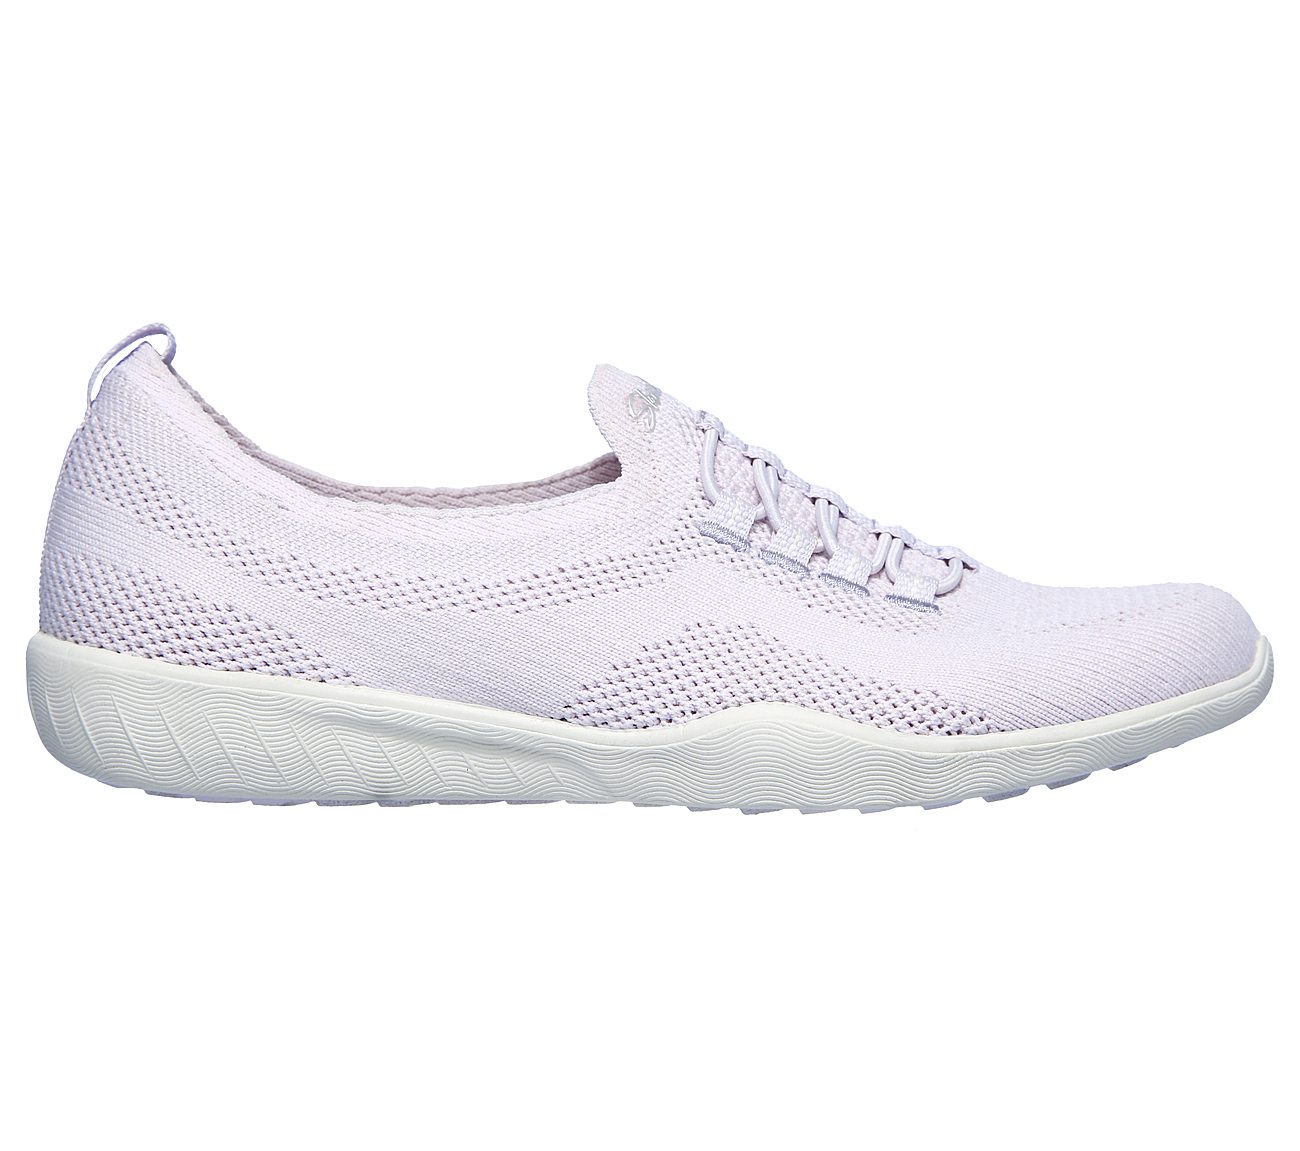 skechers stretch knit tennis shoes